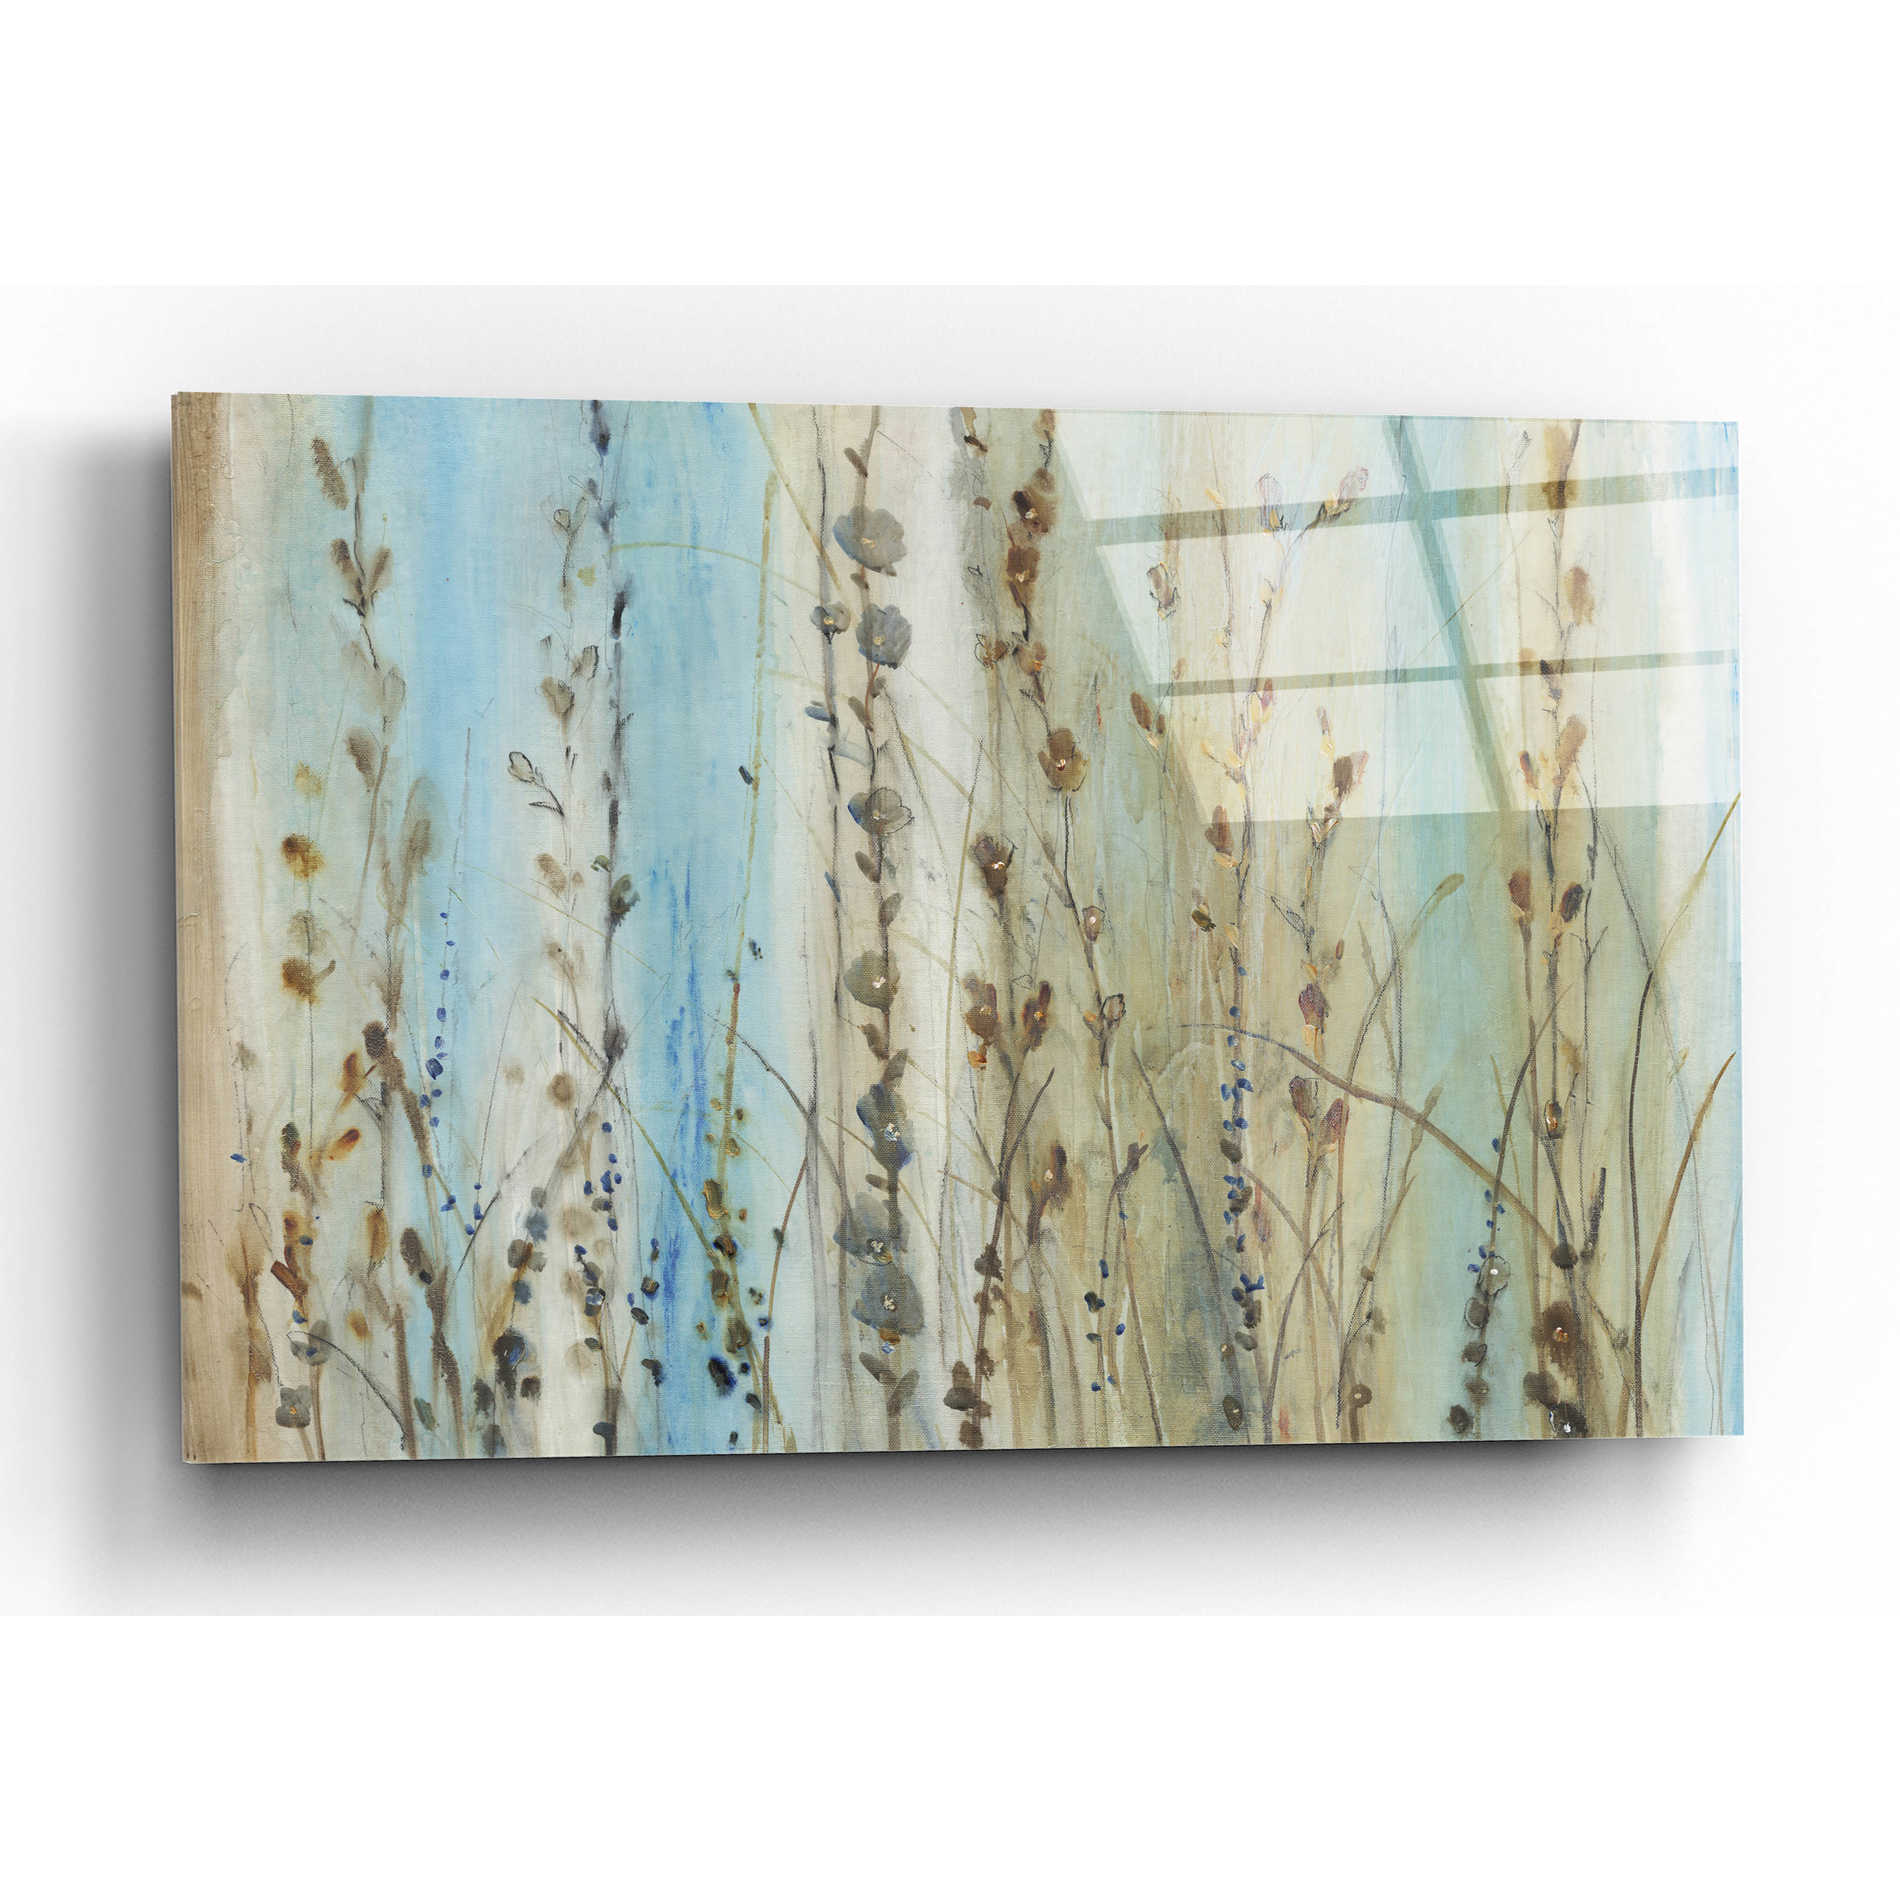 Epic Art 'Ombre Floral I' by Tim O'Toole, Acrylic Glass Wall Art